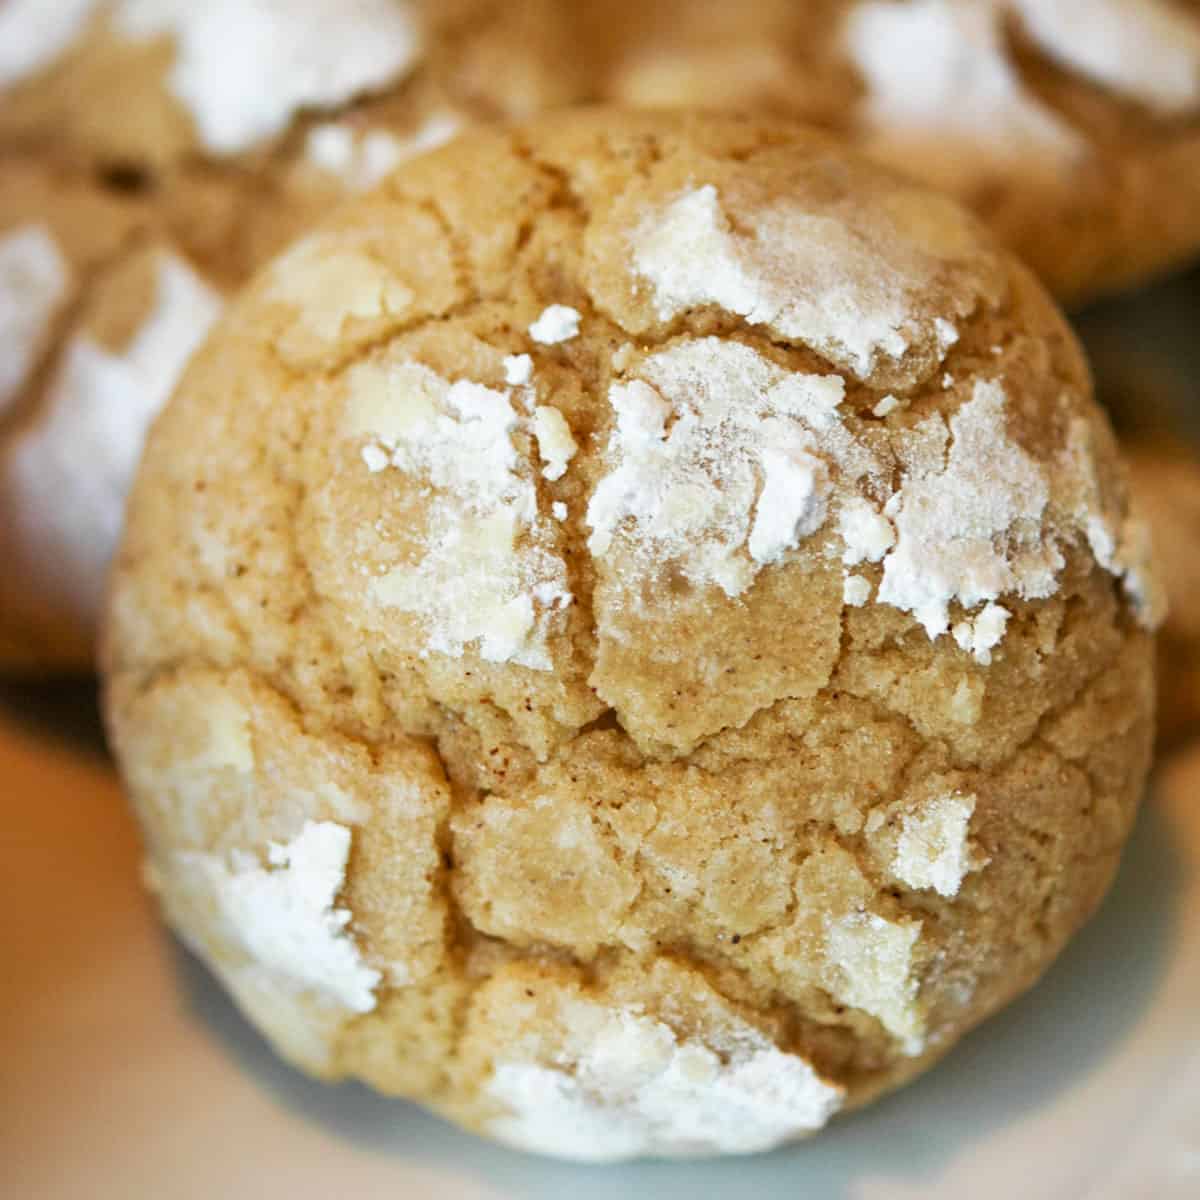 Brown butter crinkle cookie baked with powdered sugar propped up.